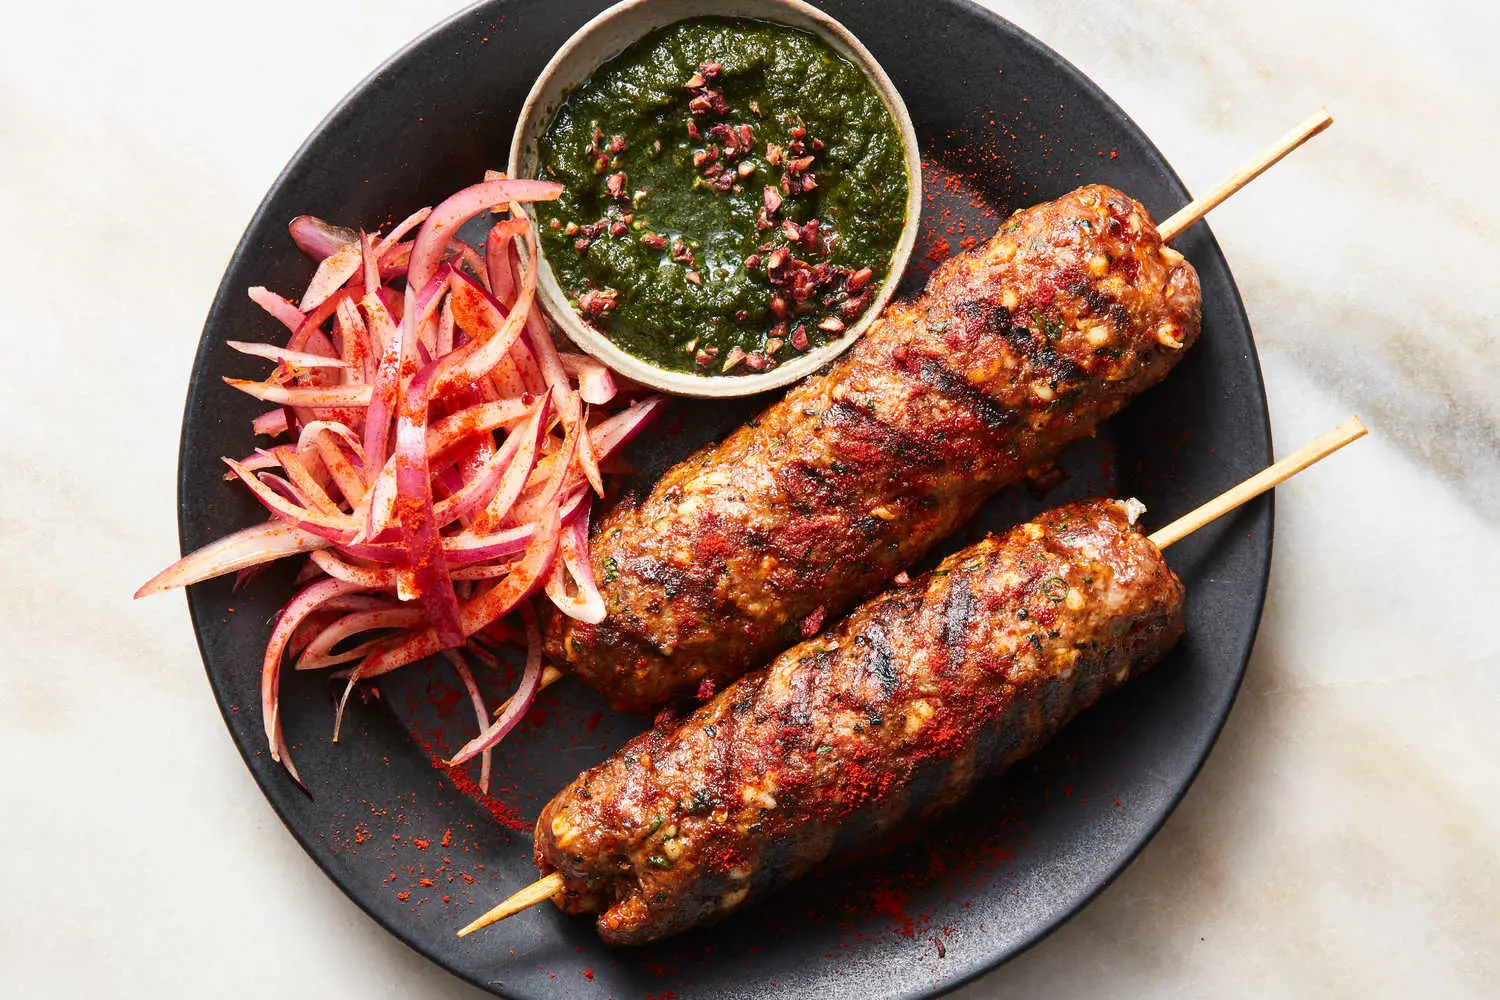 Indian-style seekh kebabs are made with traditional Indian spices